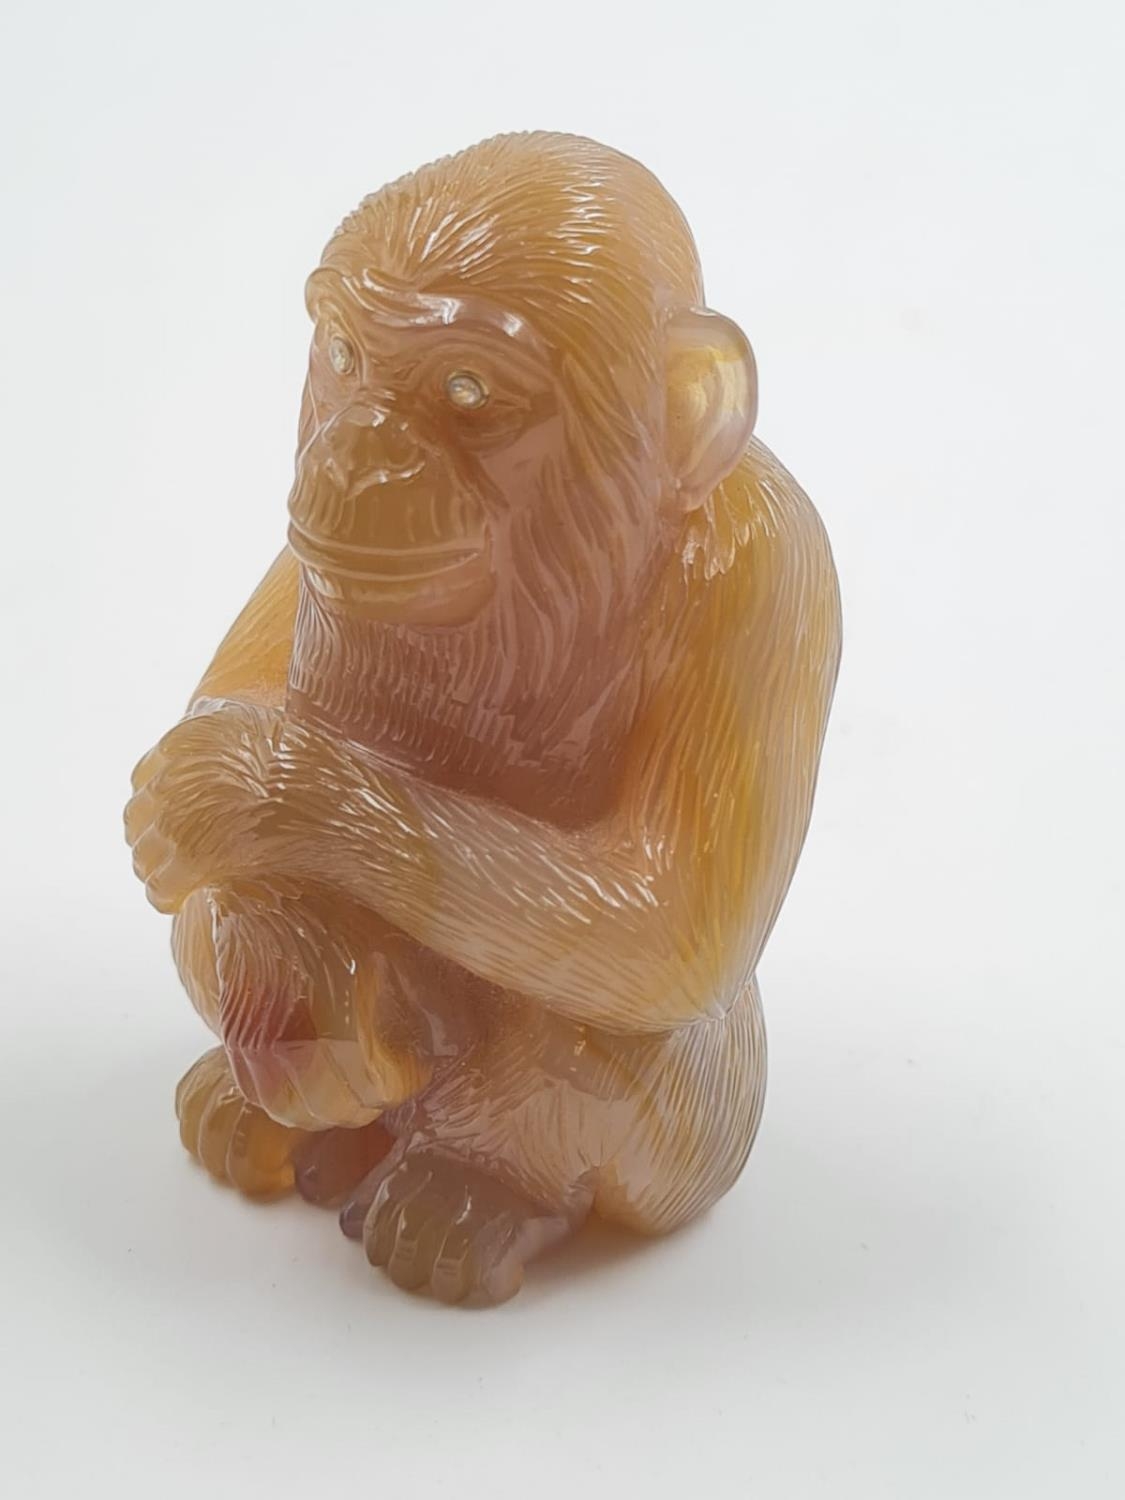 A LATE 19TH CENTURY RUSSIAN MONKEY FIGURE IN AGATE WITH DIAMOND EYES SET IN 14CT GOLD, 6 CMS TALL - Image 2 of 6